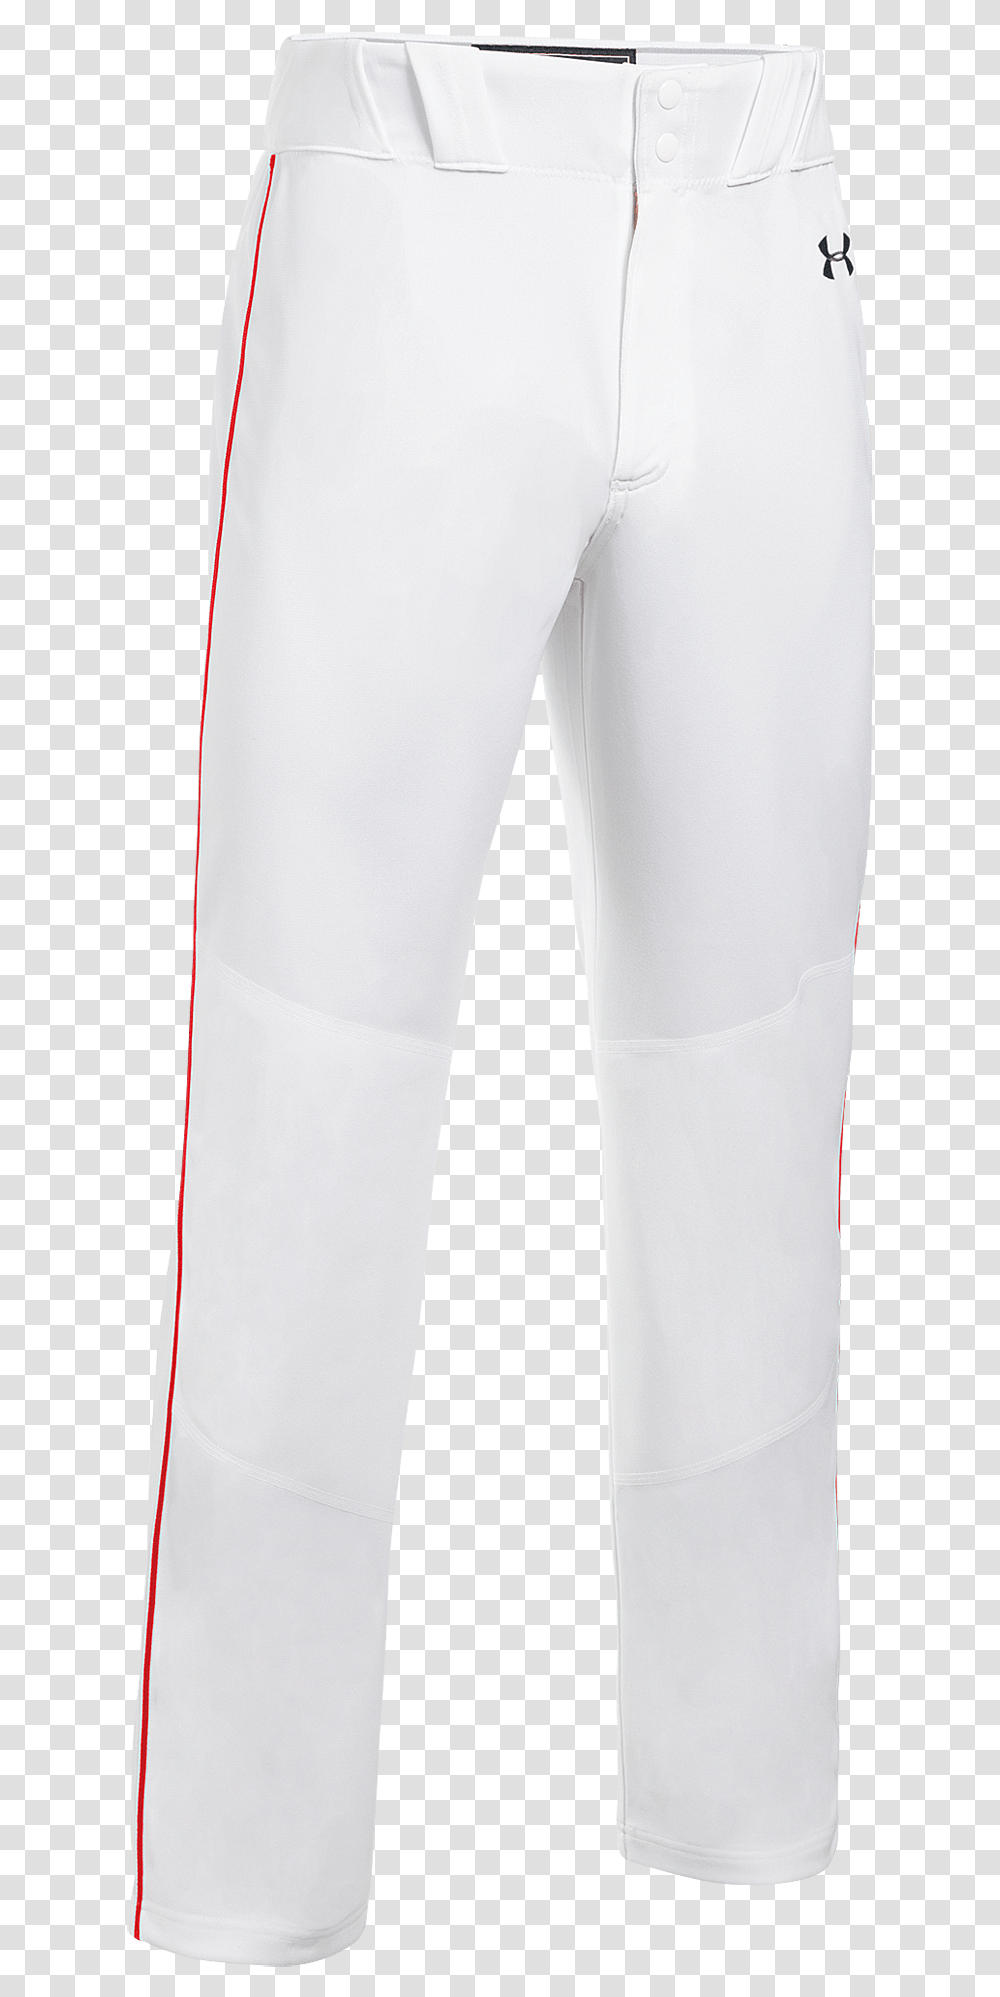 Under Armour Team Piped Icon Baseball Chino Cloth, Pants, Clothing, Apparel, Shorts Transparent Png